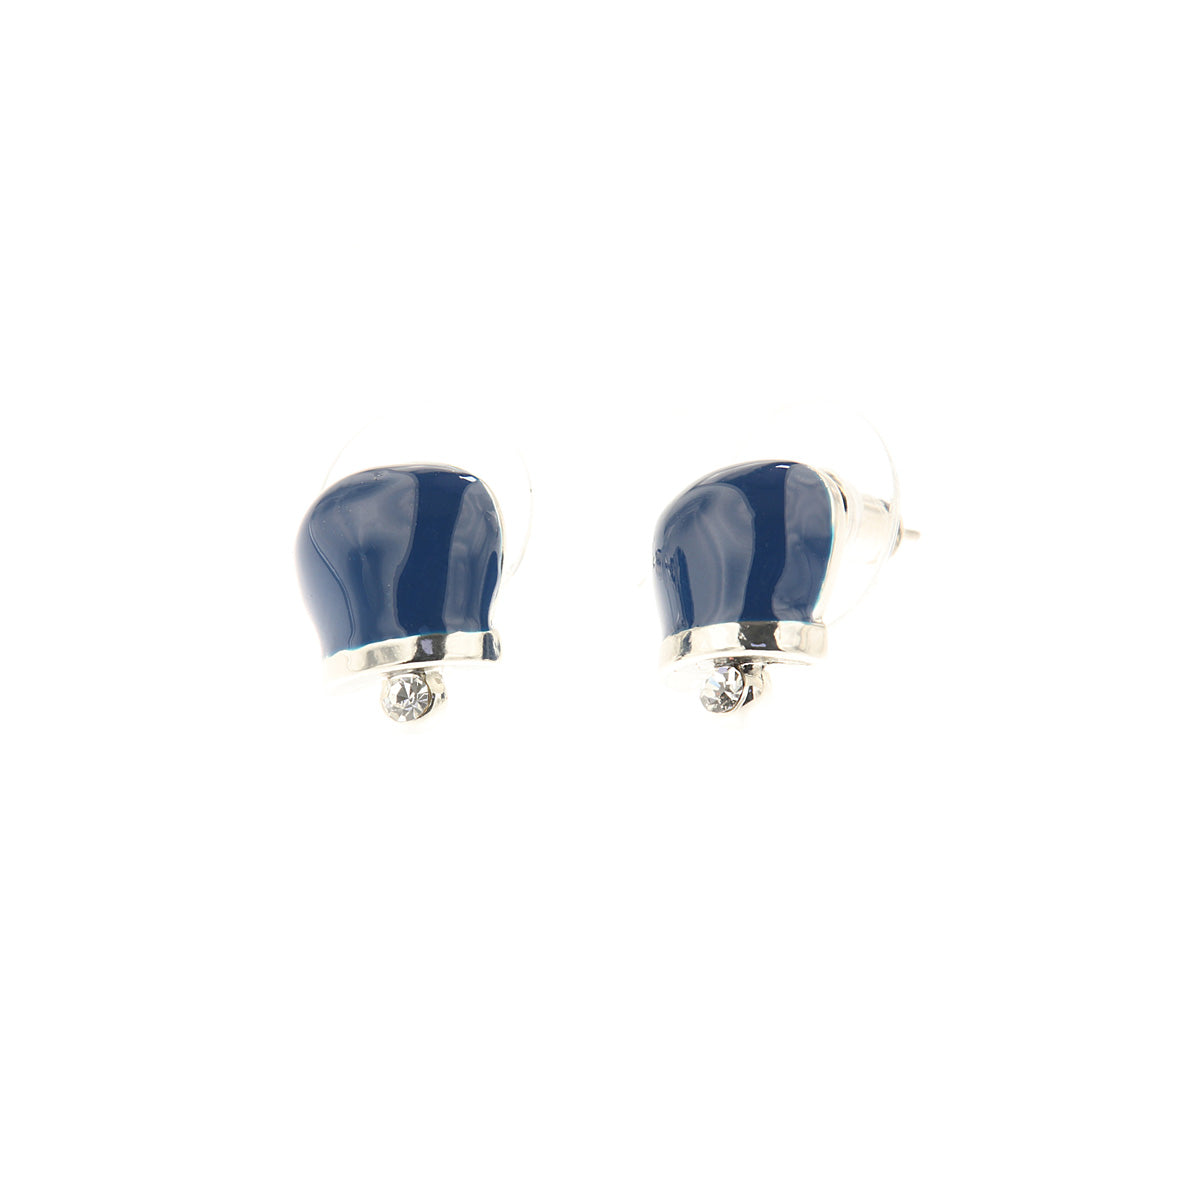 Metal earrings in the shape of a charming bell with blue enamels and crystals